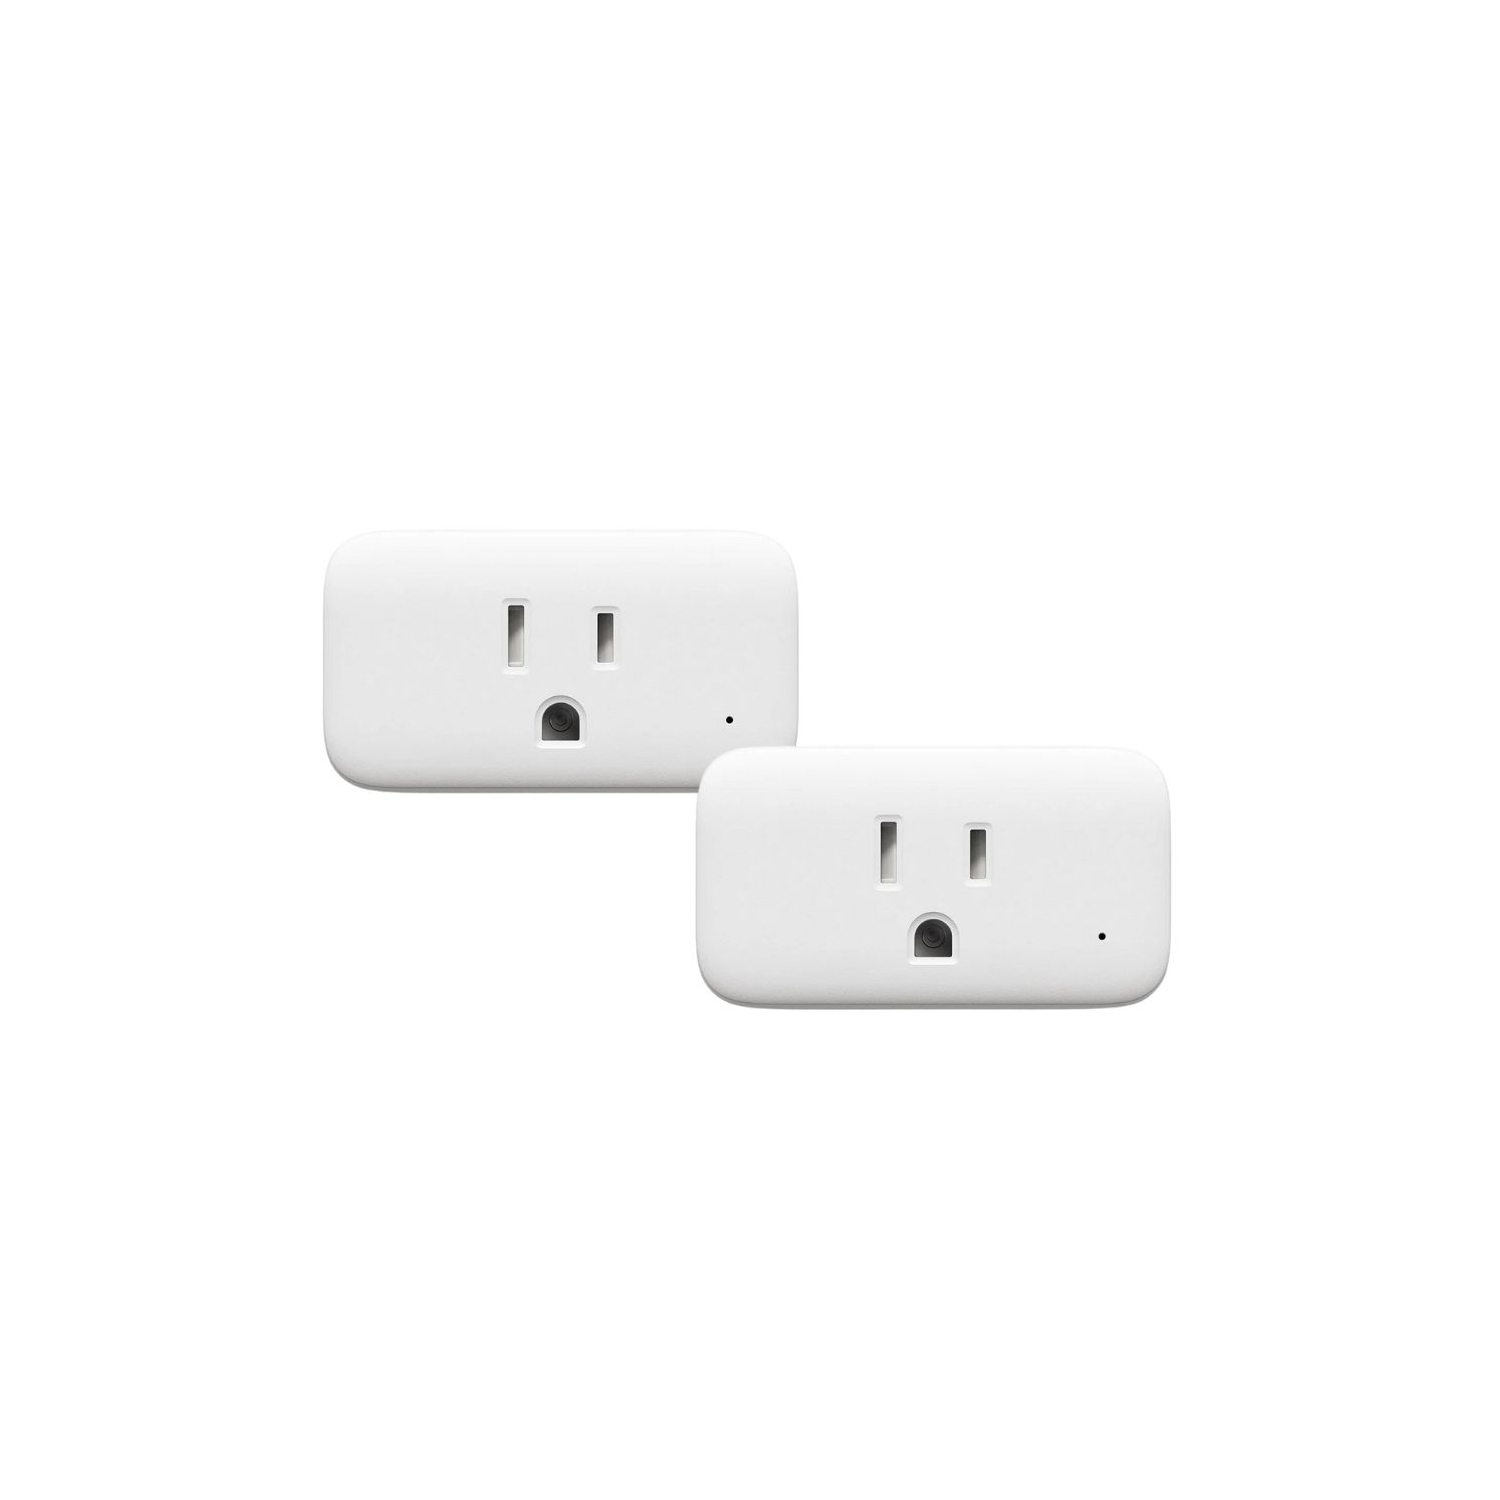 SwitchBot Smart WiFi Plug Mini | Apple HomeKit Enabled, 15A, Bluetooth, Works with Alexa, Google Home, App Remote Control & Timer Function, No Hub Required - 2-pack Bundle